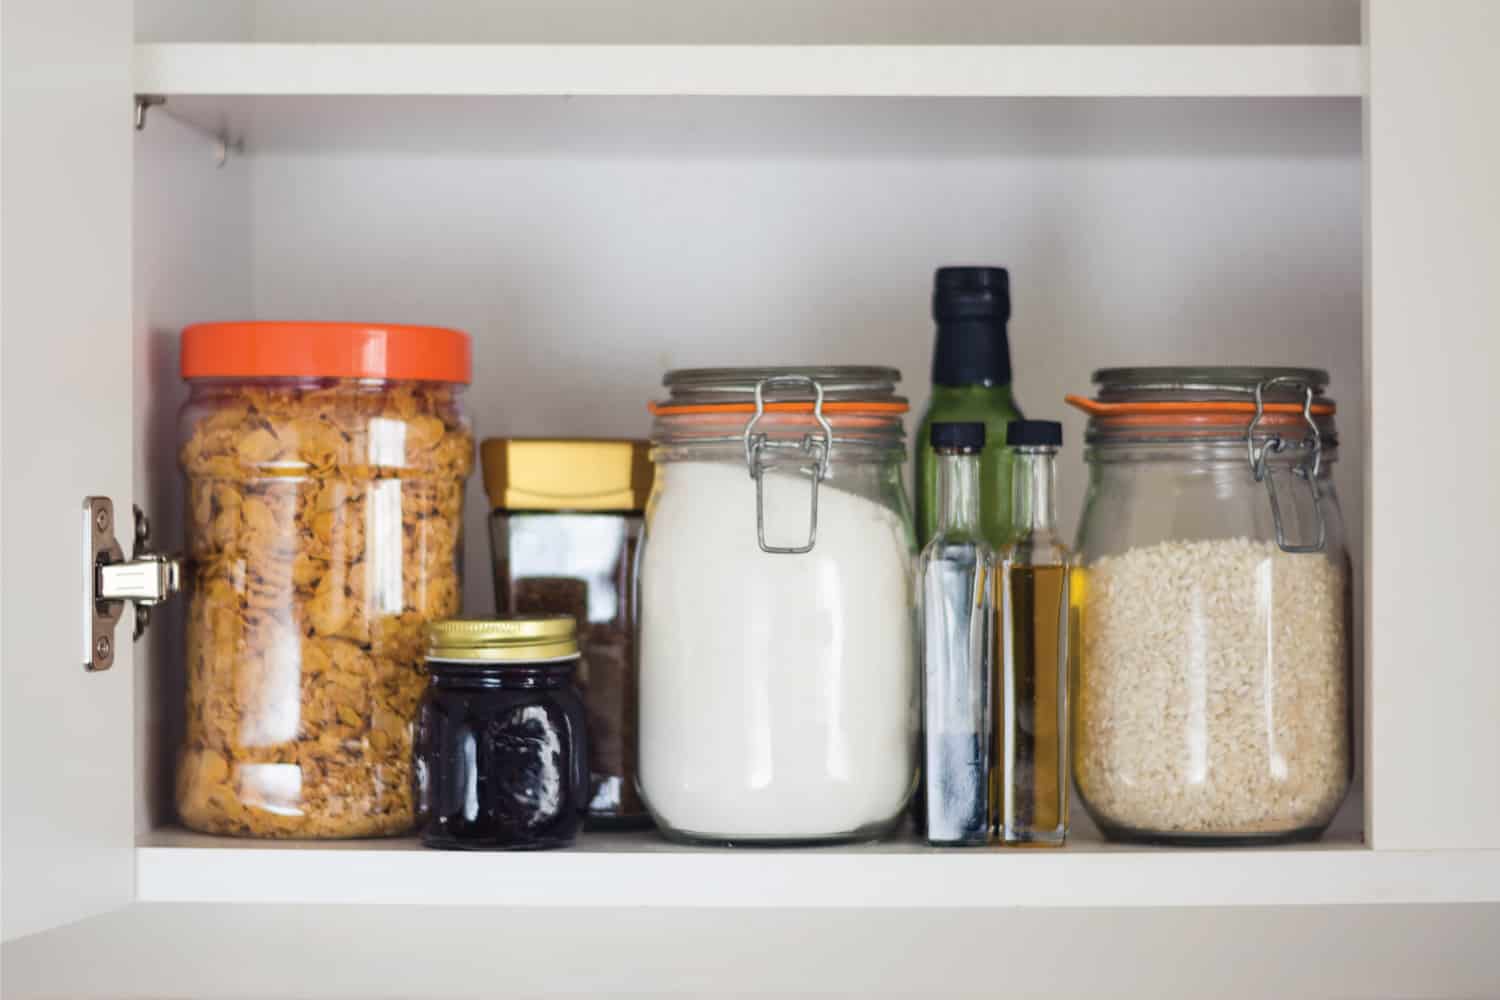 stocked kitchen pantry with food - glass jars and glass containers of cereals, jam, coffee, sugar, flour, oil, vinegar, rice